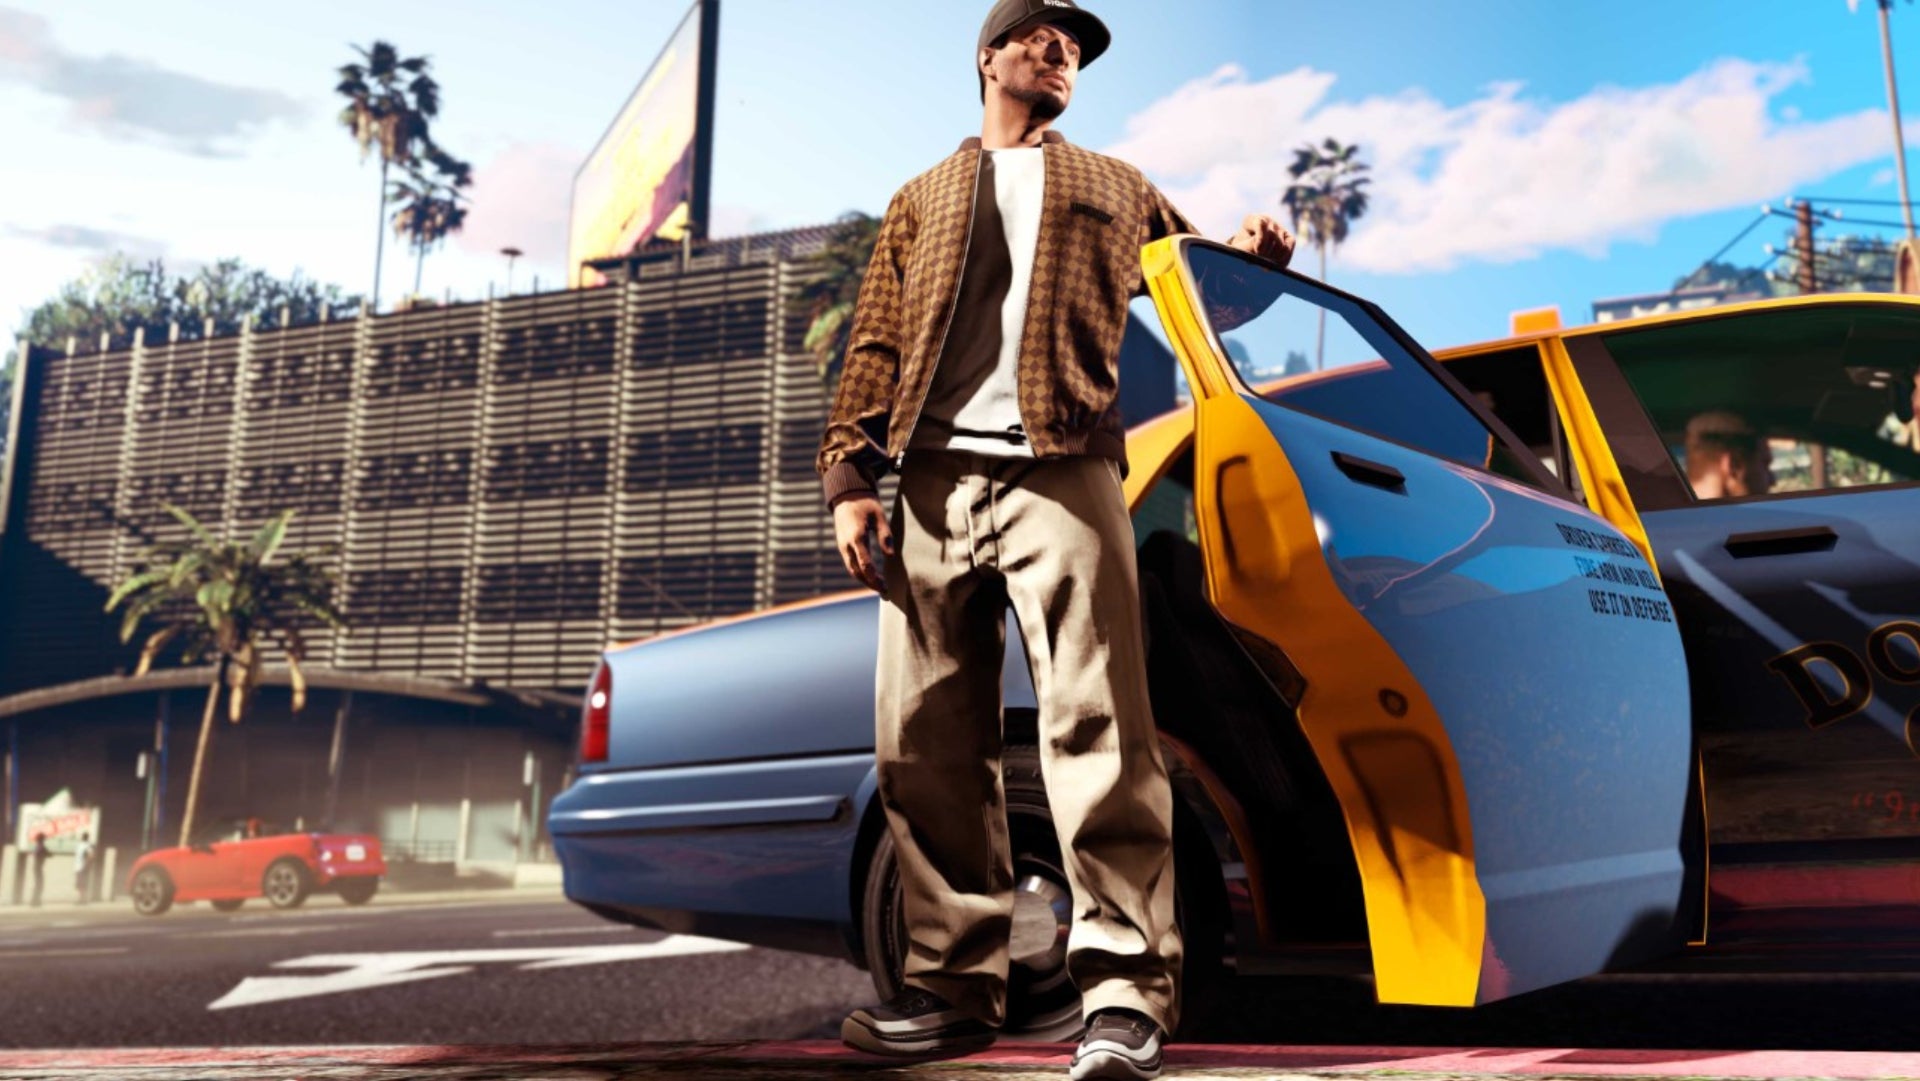 GTA Plus official Rockstar image of a person standing in front of an open taxi door